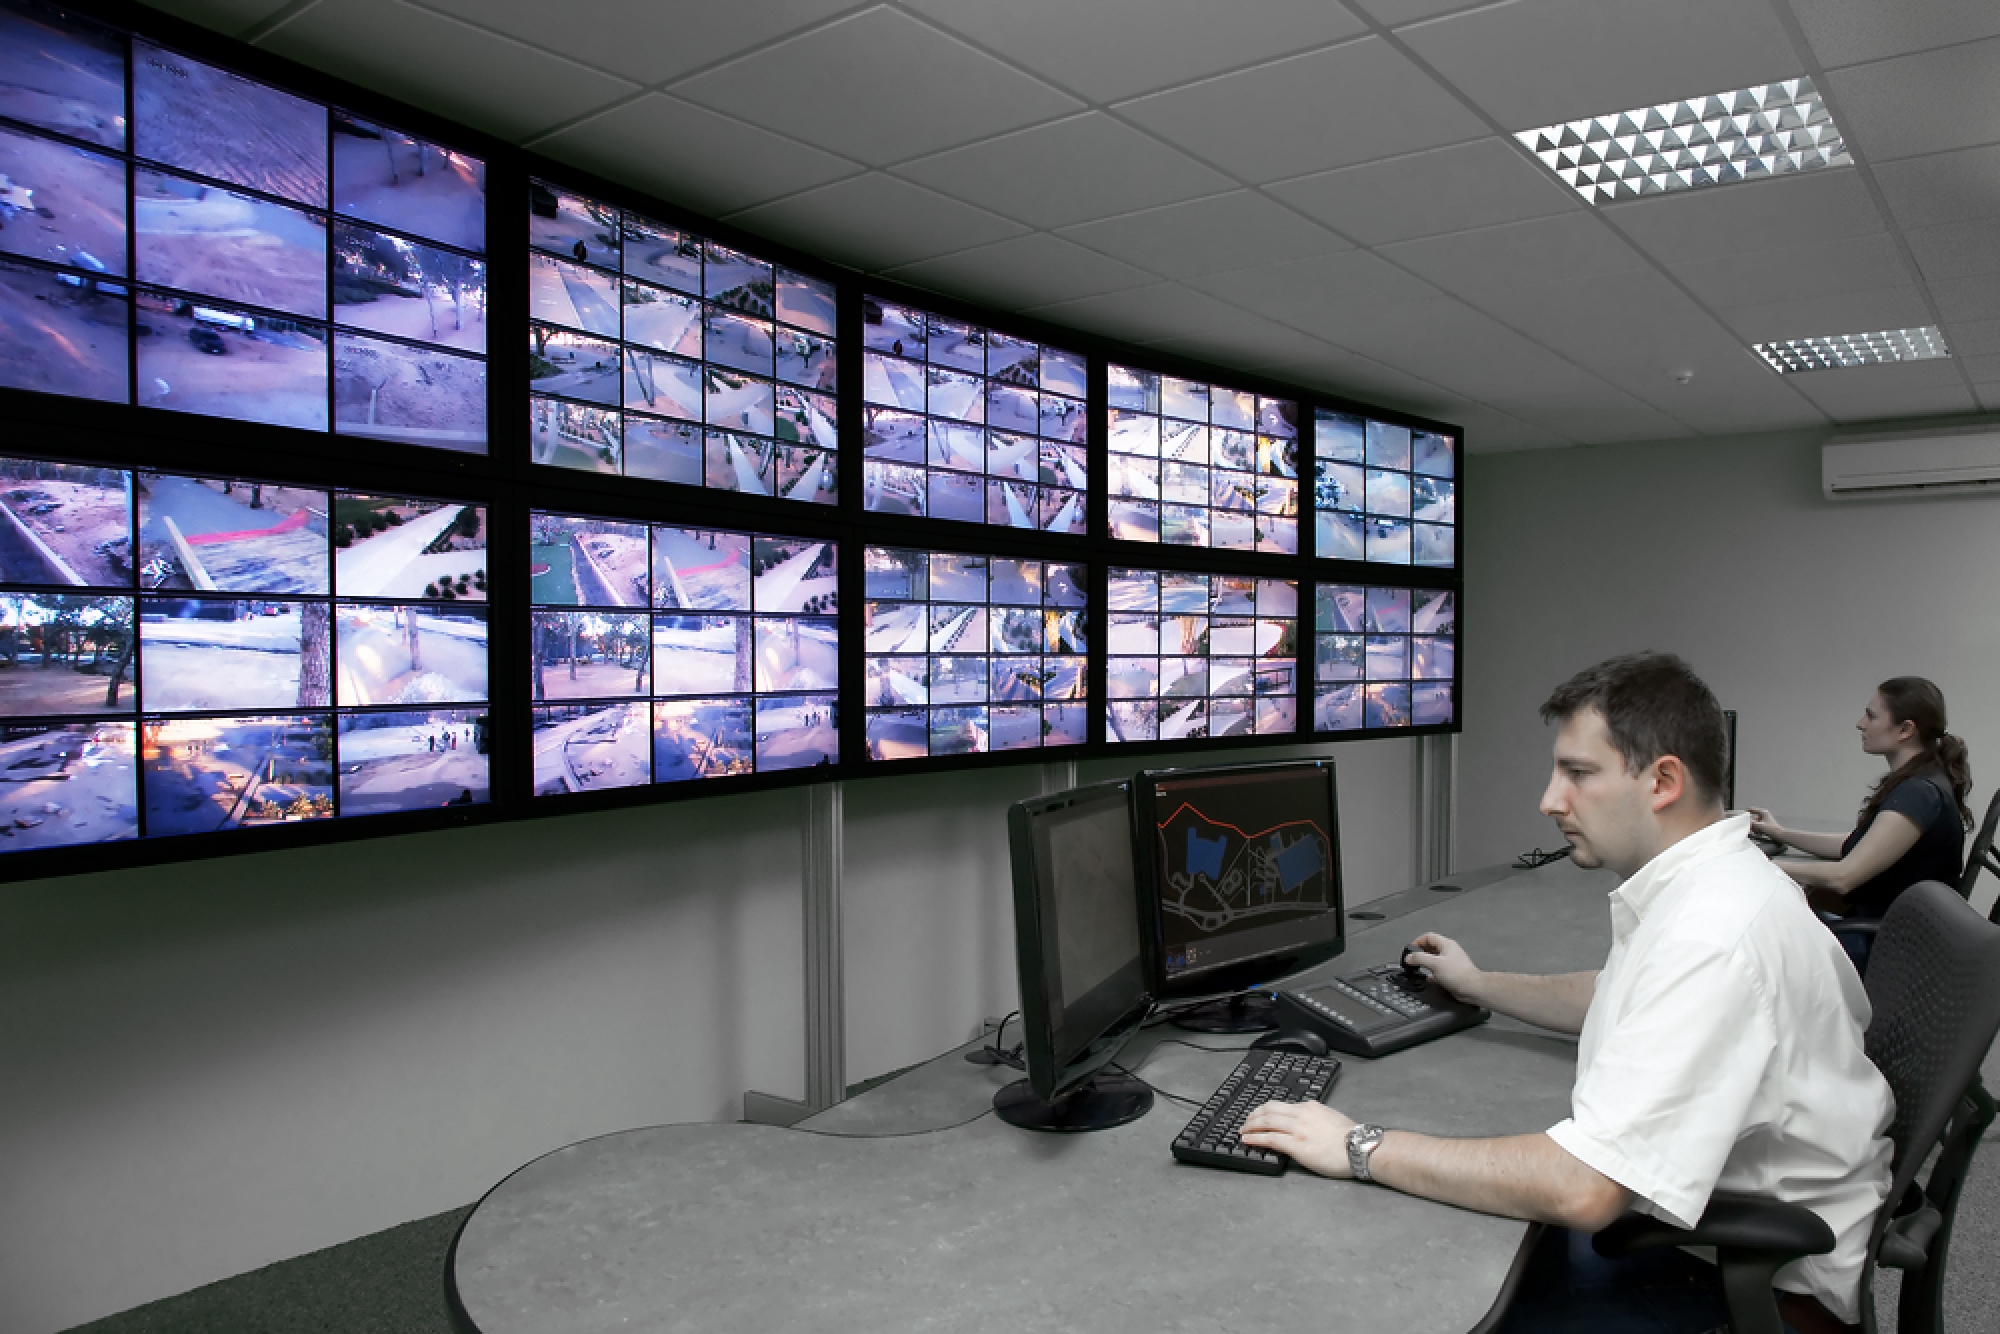 VIDEO SURVEILANCE SYSTEMS